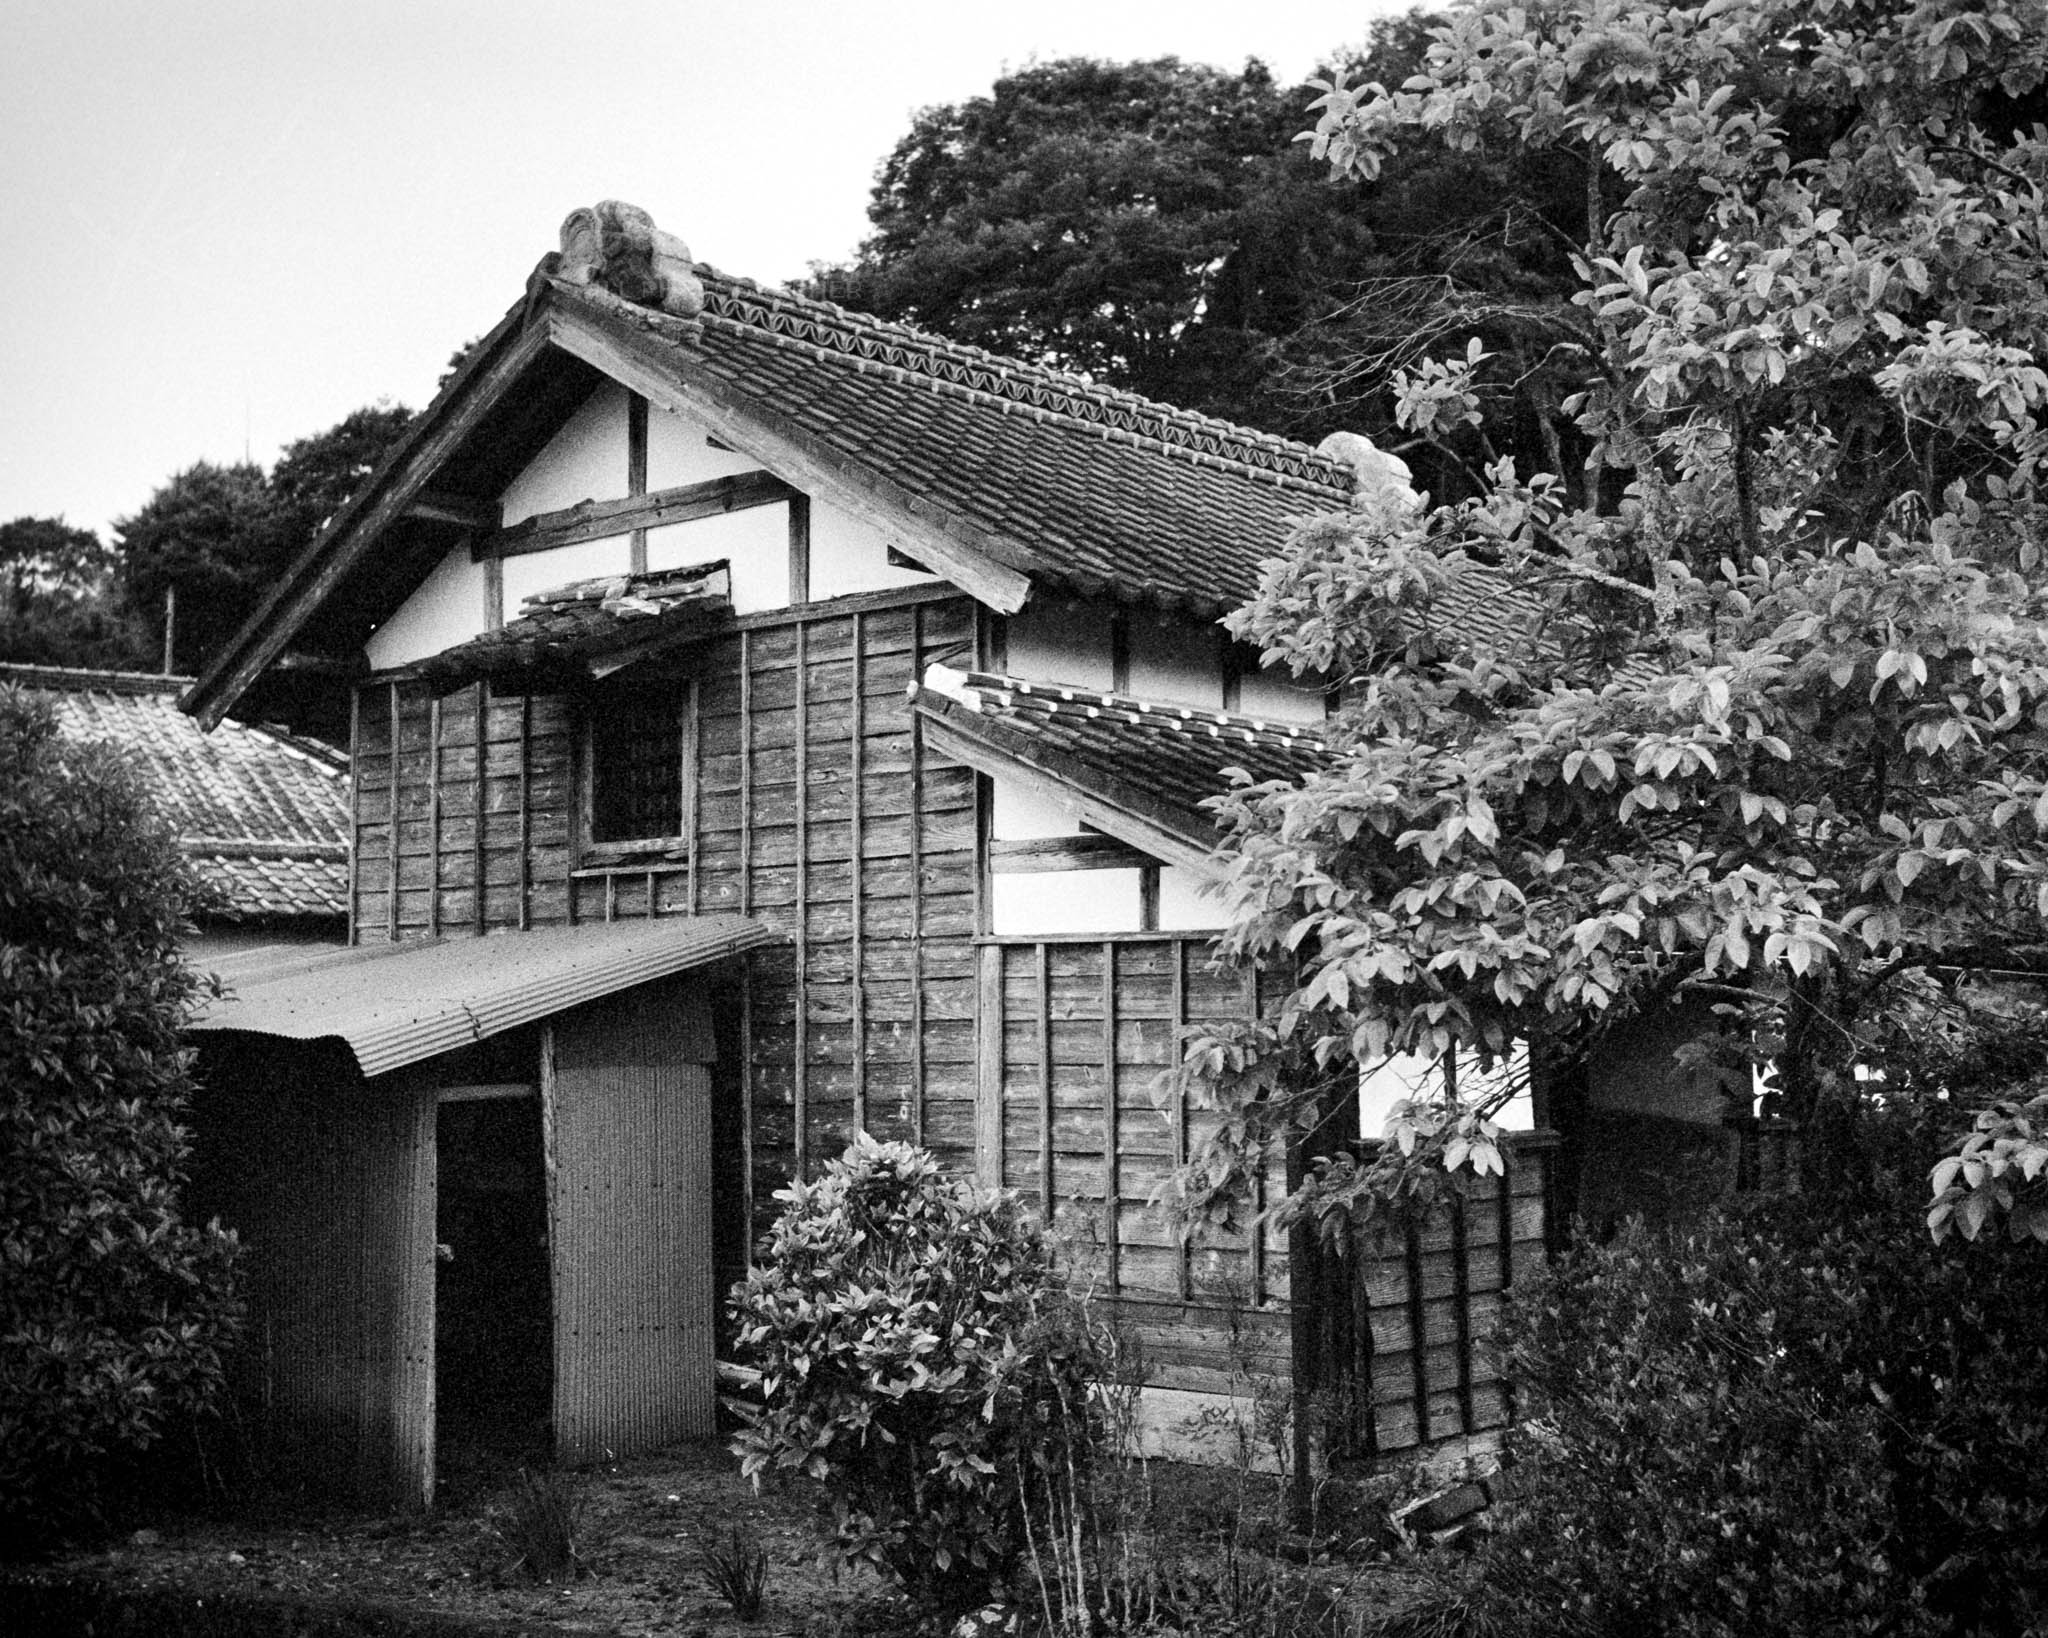 Black and white image of a deserted post-war rural house overtaken by natures reclamation.